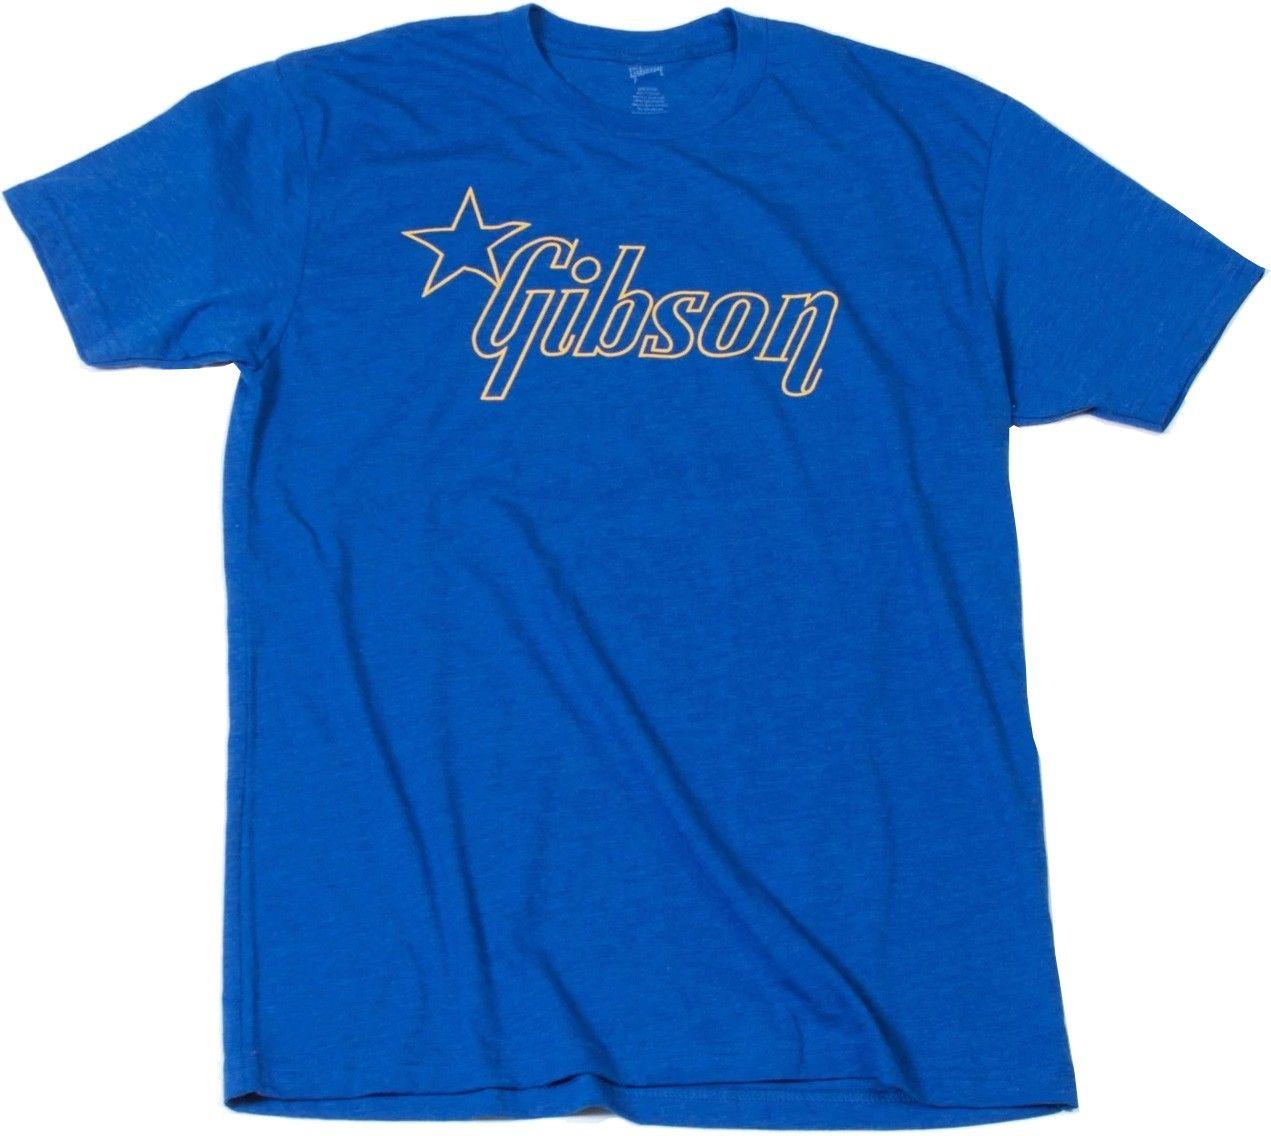 All-Star Clothing and Apparel Logo - Shirt T Gibson Star Logo T Medium - Shirts & Sweaters - Clothing ...